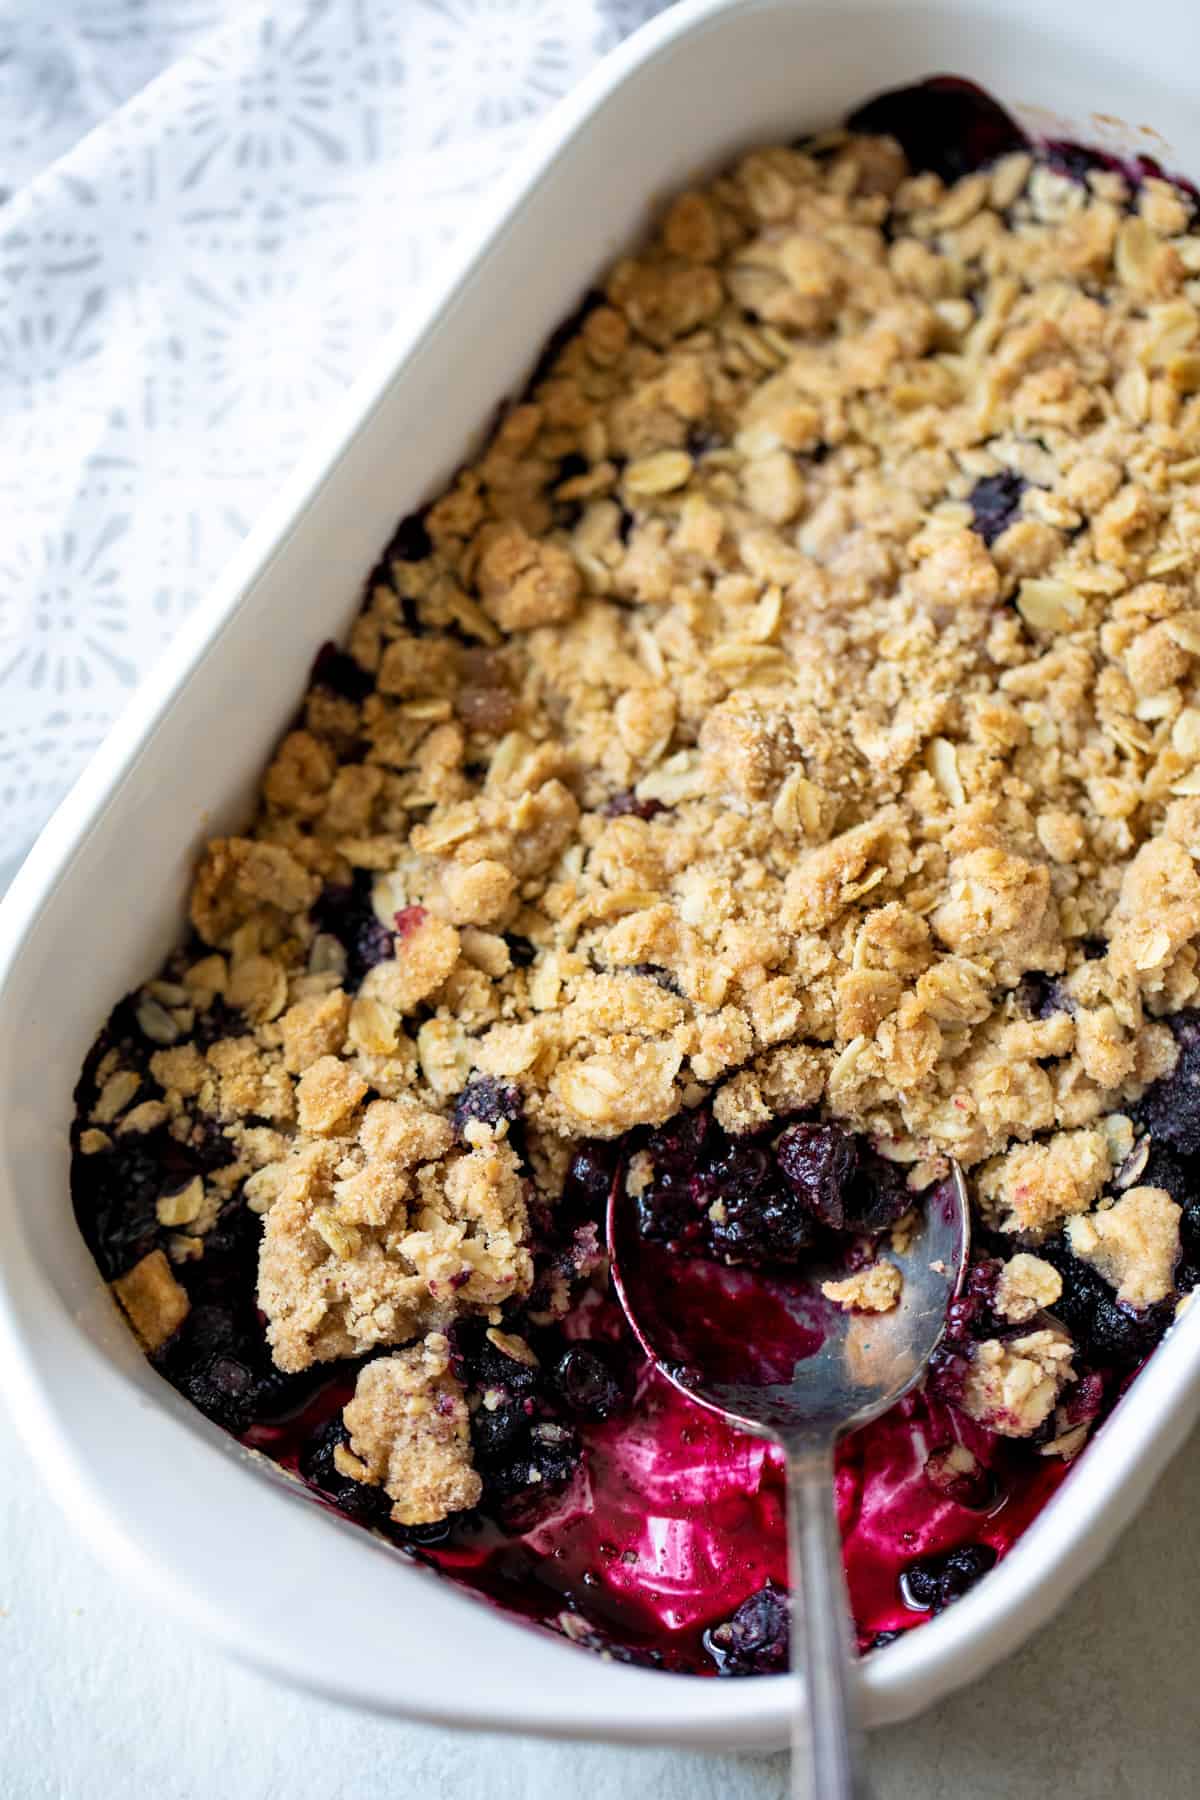 Baked Berry Crisp in white dish with spoon scooping out serving.